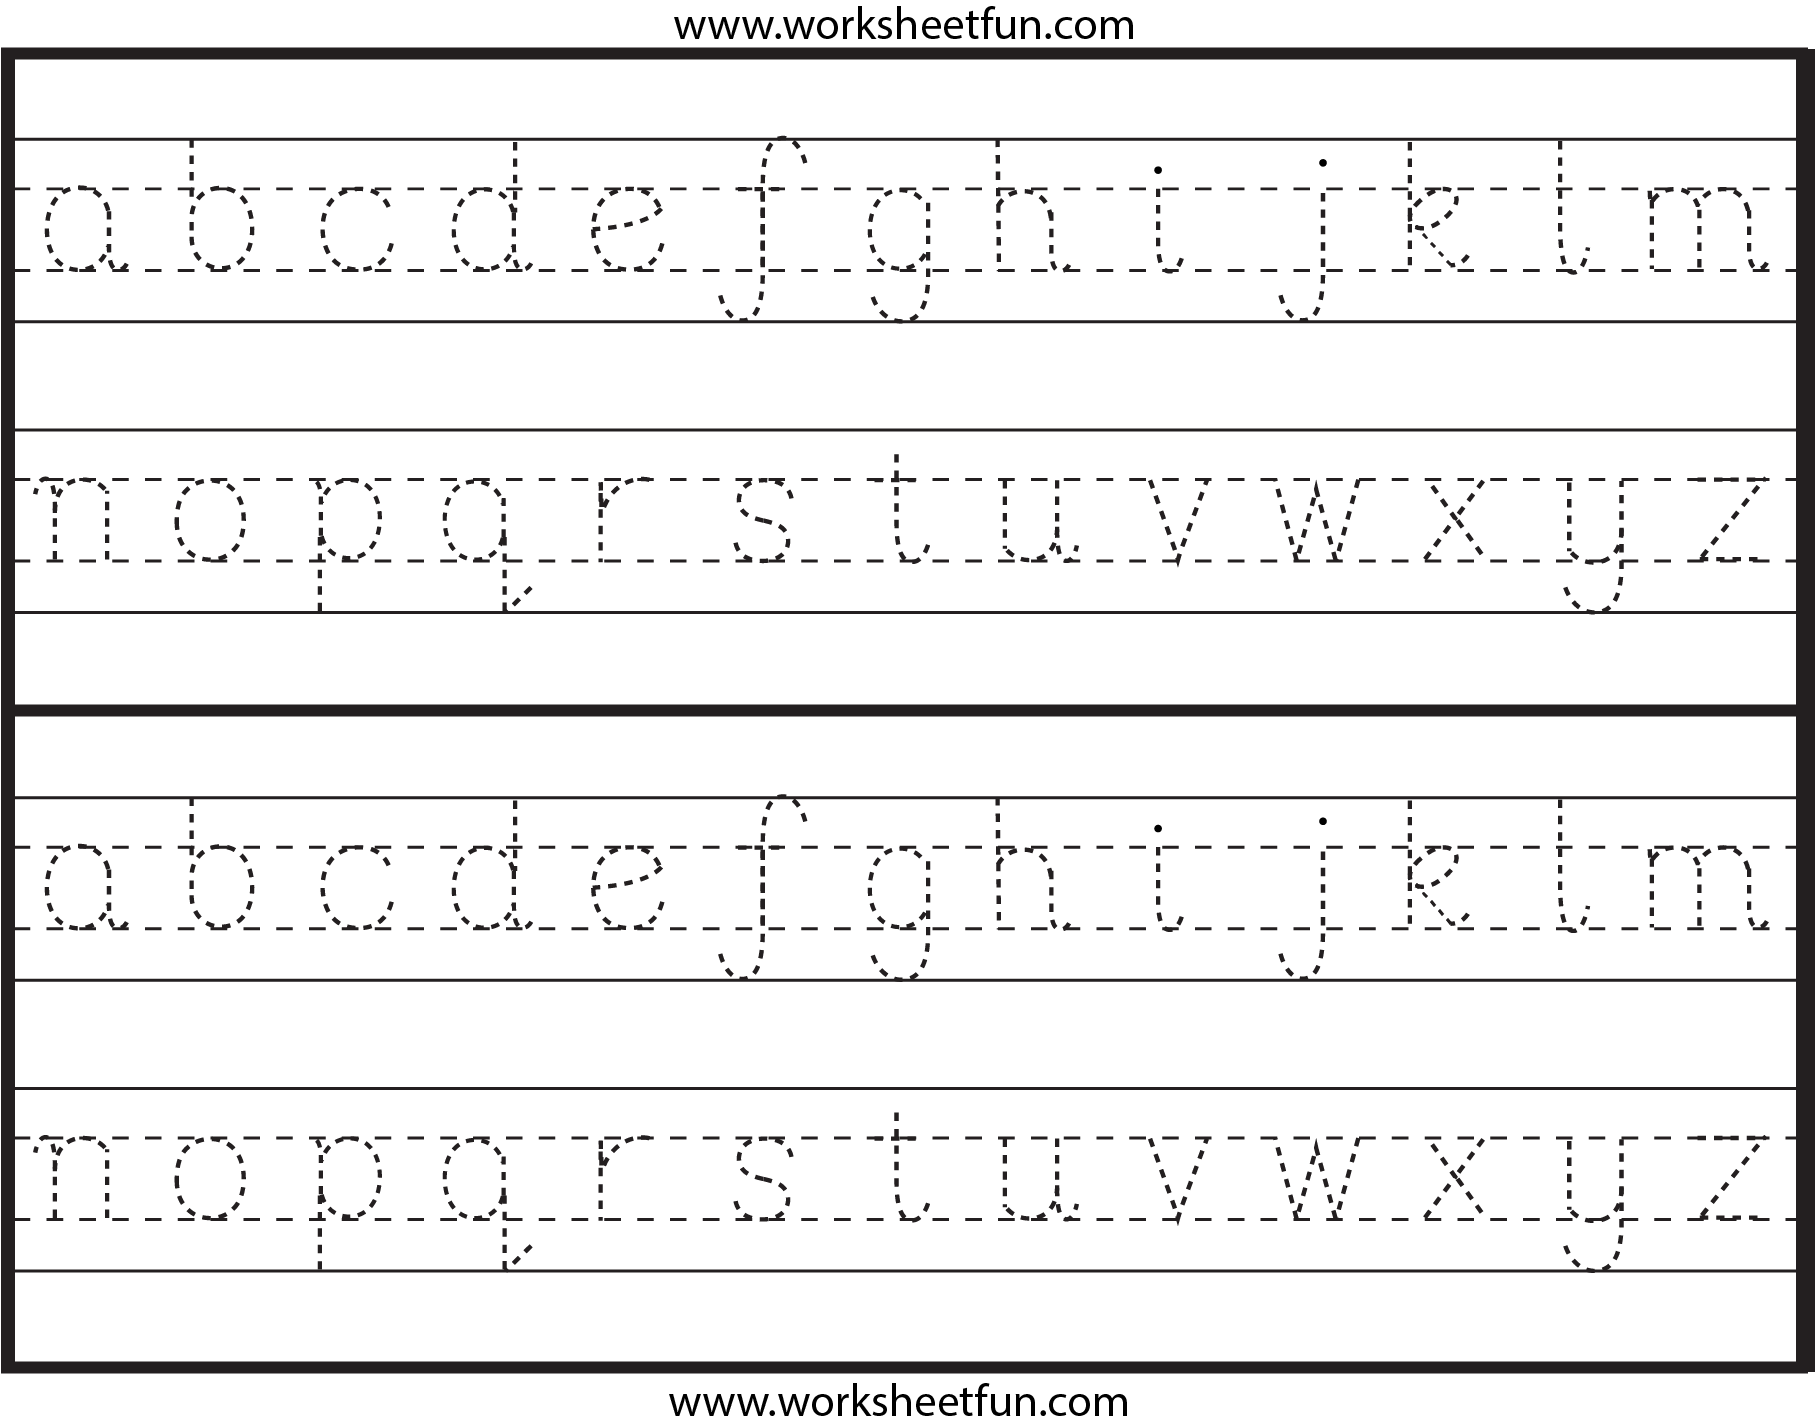 Tracing Lowercase Letters Free Printable